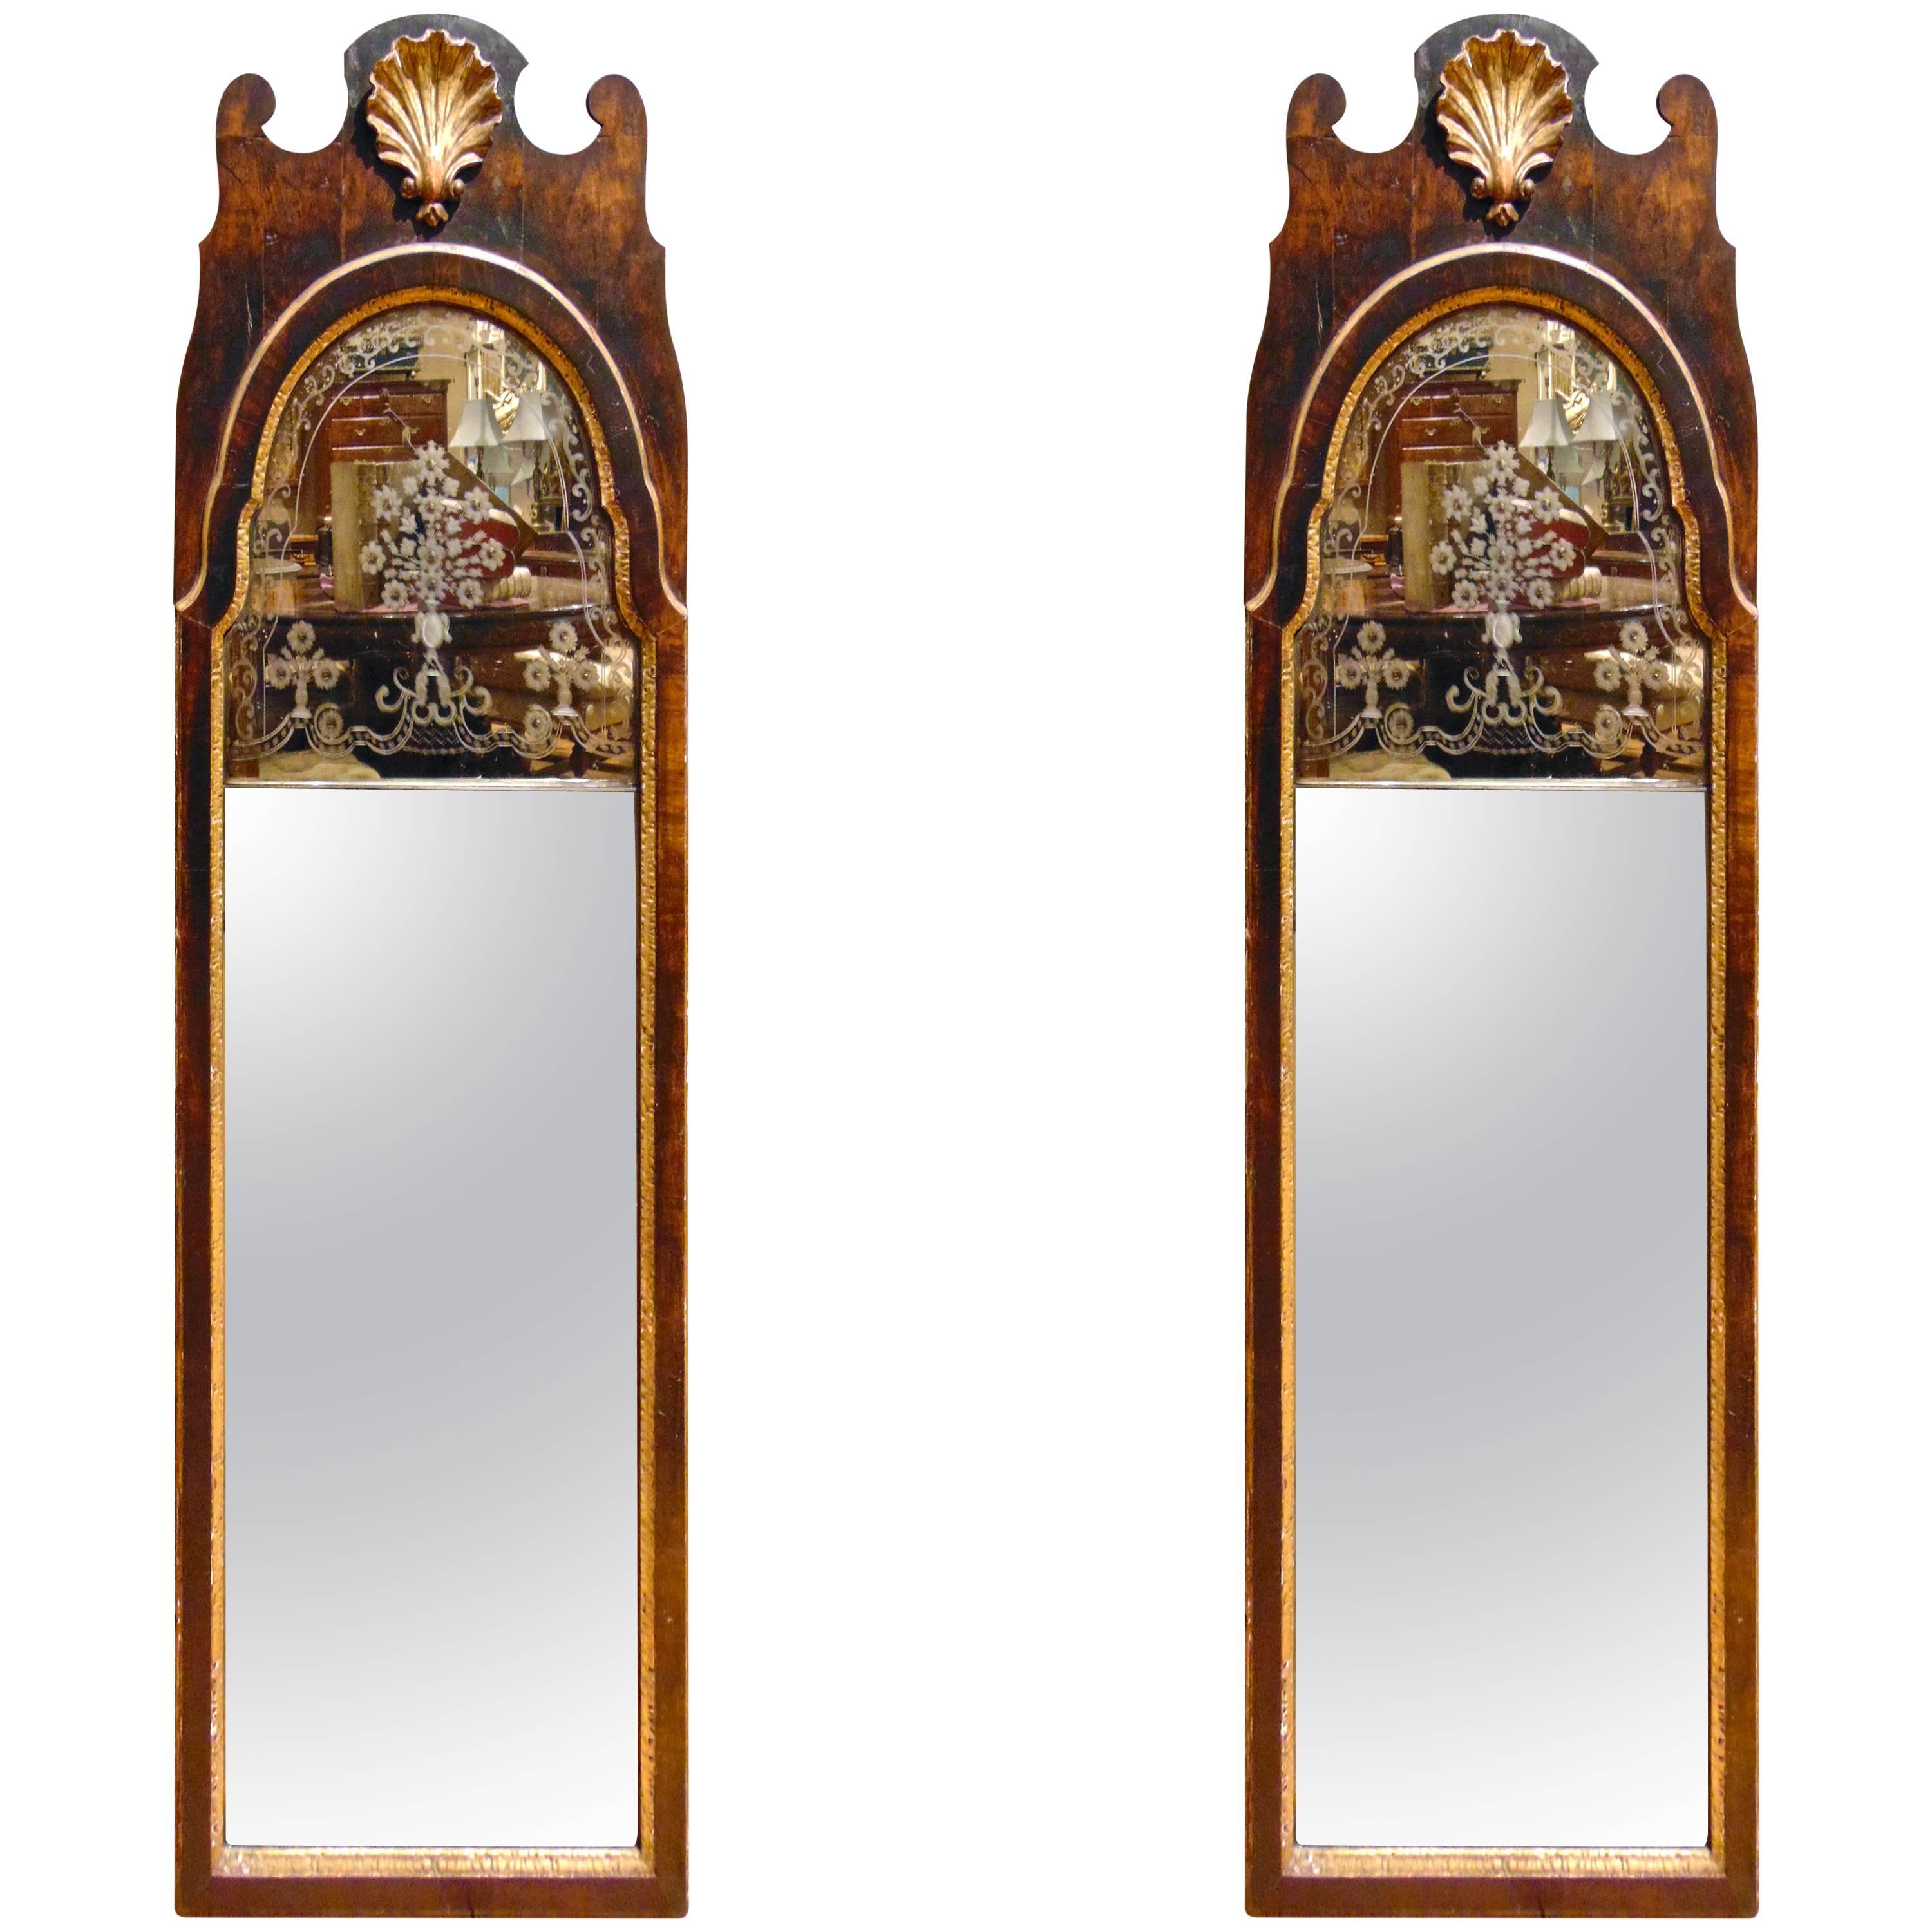 Pair of Period George II Walnut and Gilt Etched Glass Mirrors